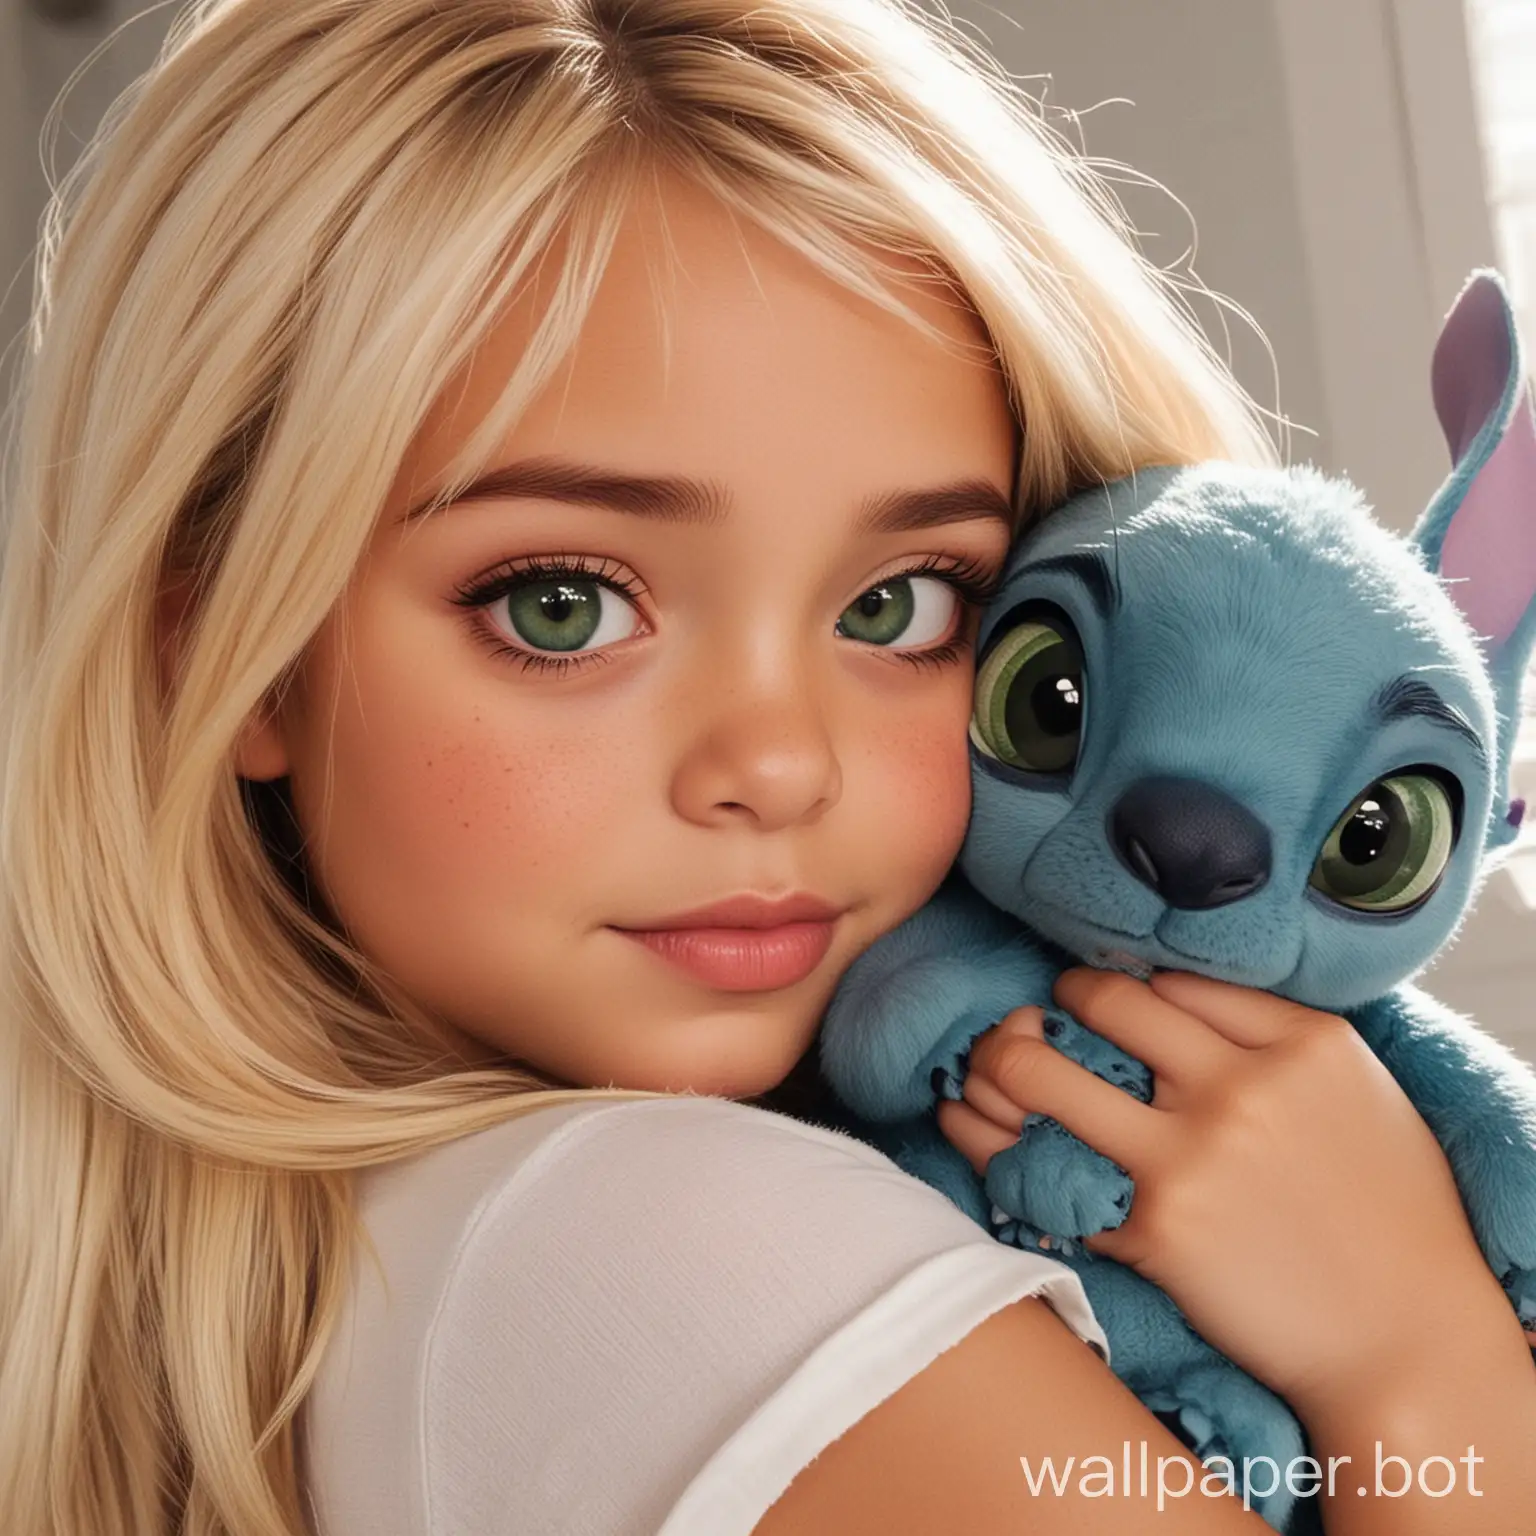 Lilo-and-Stitch-Affectionate-Bond-between-a-Girl-with-Tan-Skin-Blond-Hair-Green-Eyes-and-Stitch